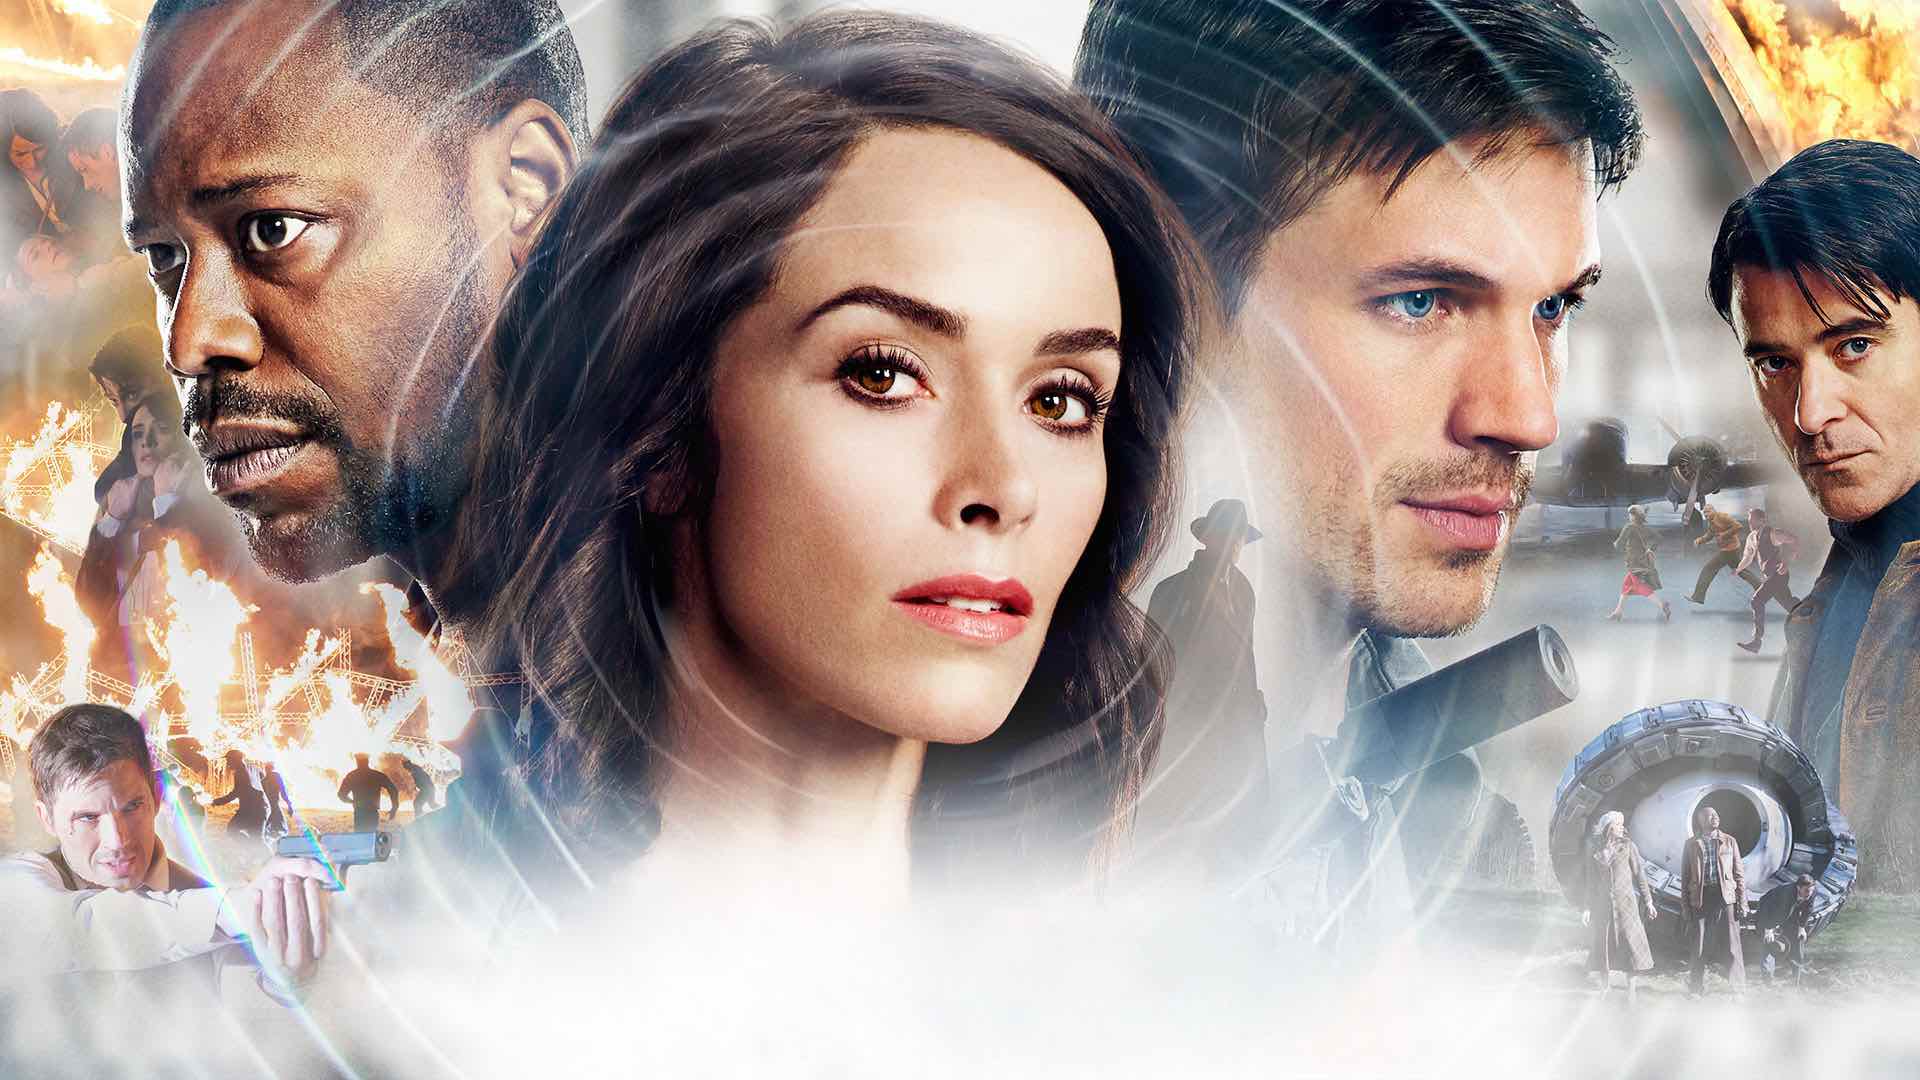 We spoke to fans of 'Timeless' about the show’s axing as well as what they really thought of the 'Timeless' movie.